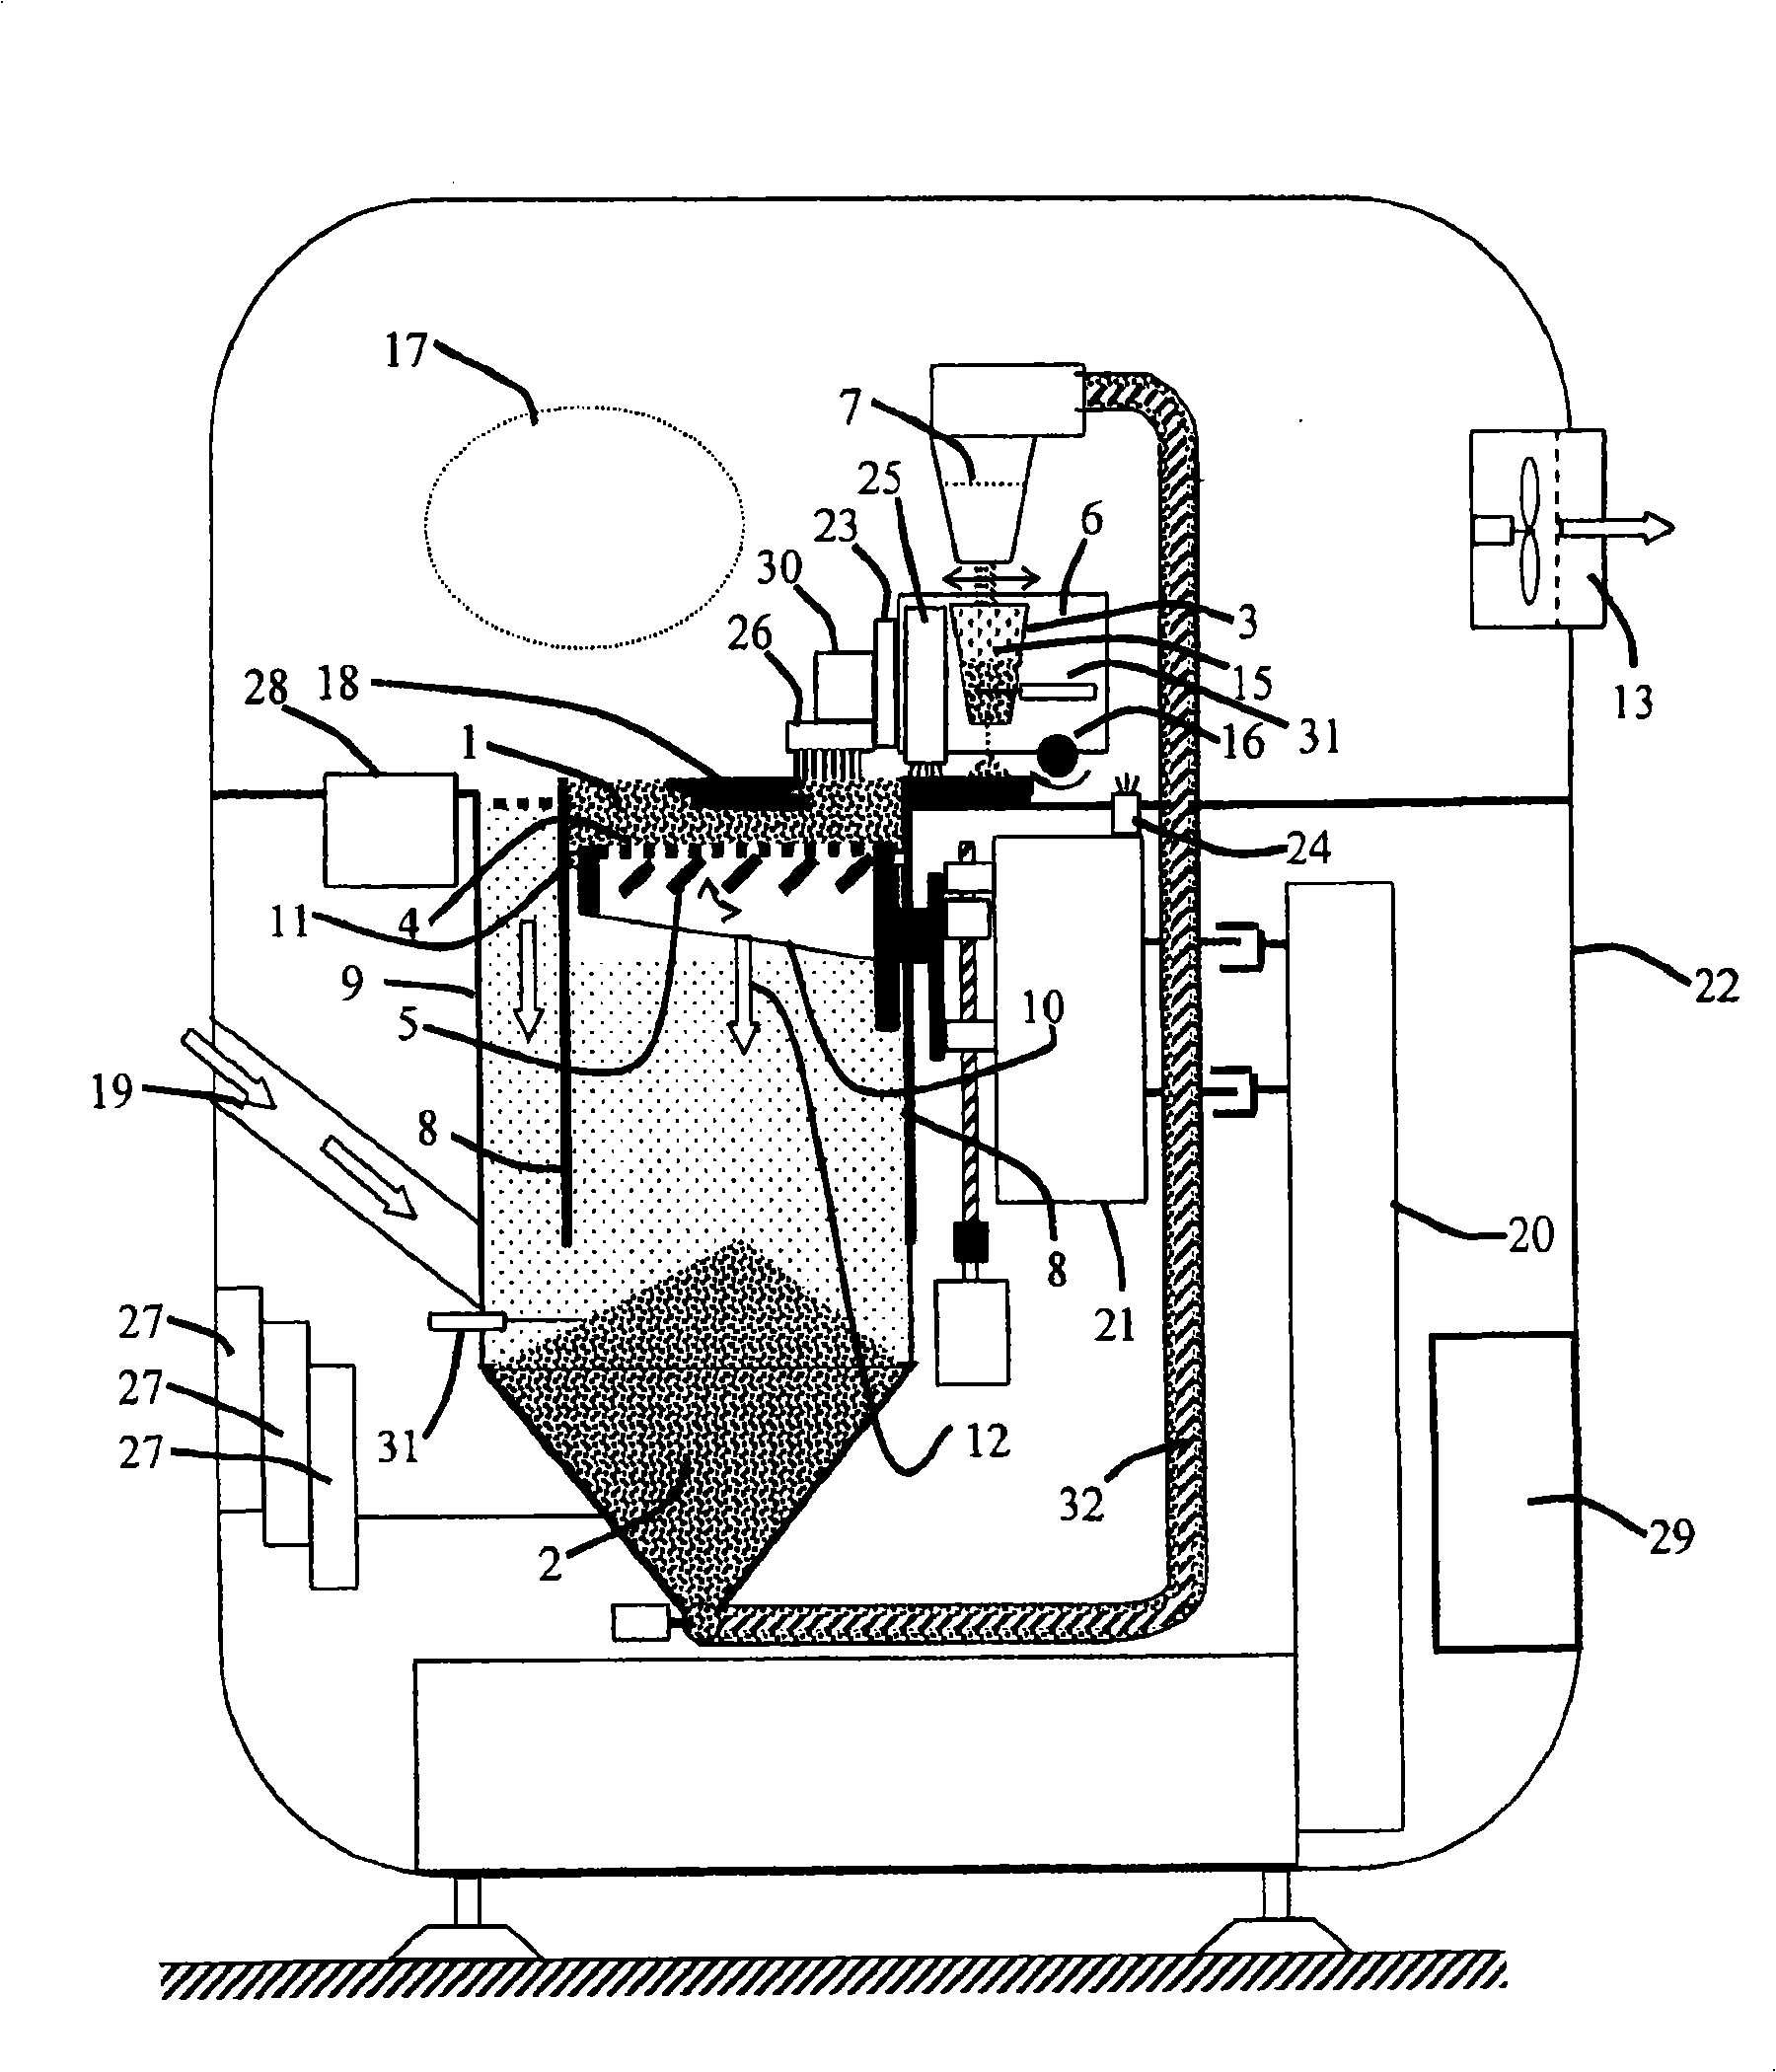 An apparatus for building a three-dimensional article and a method for building a three-dimensional article